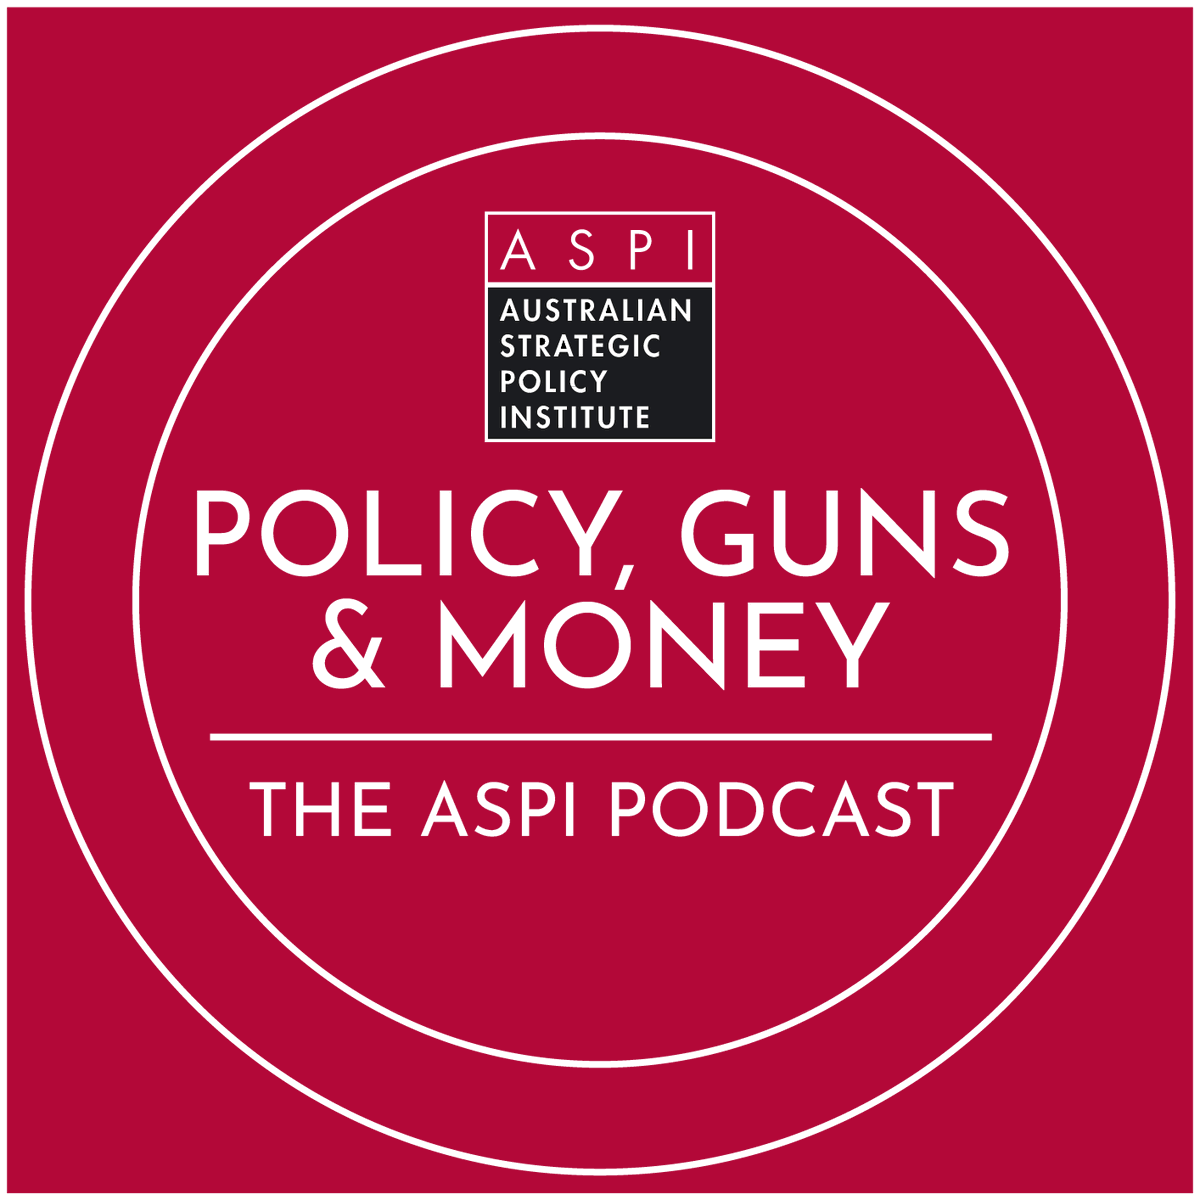 🎙️ NEW PODCAST 🎙️ In this episode of the ASPI podcast: 1⃣ @davidwroe hosts a discussion with @Nrg8000 and @Lucasdeanemyers on the latest developments from Myanmar 2⃣ @davidwroe, @Blake_J_Johnson and @graham_euan discuss geopolitics in the Pacific and what to expect in 2024.…